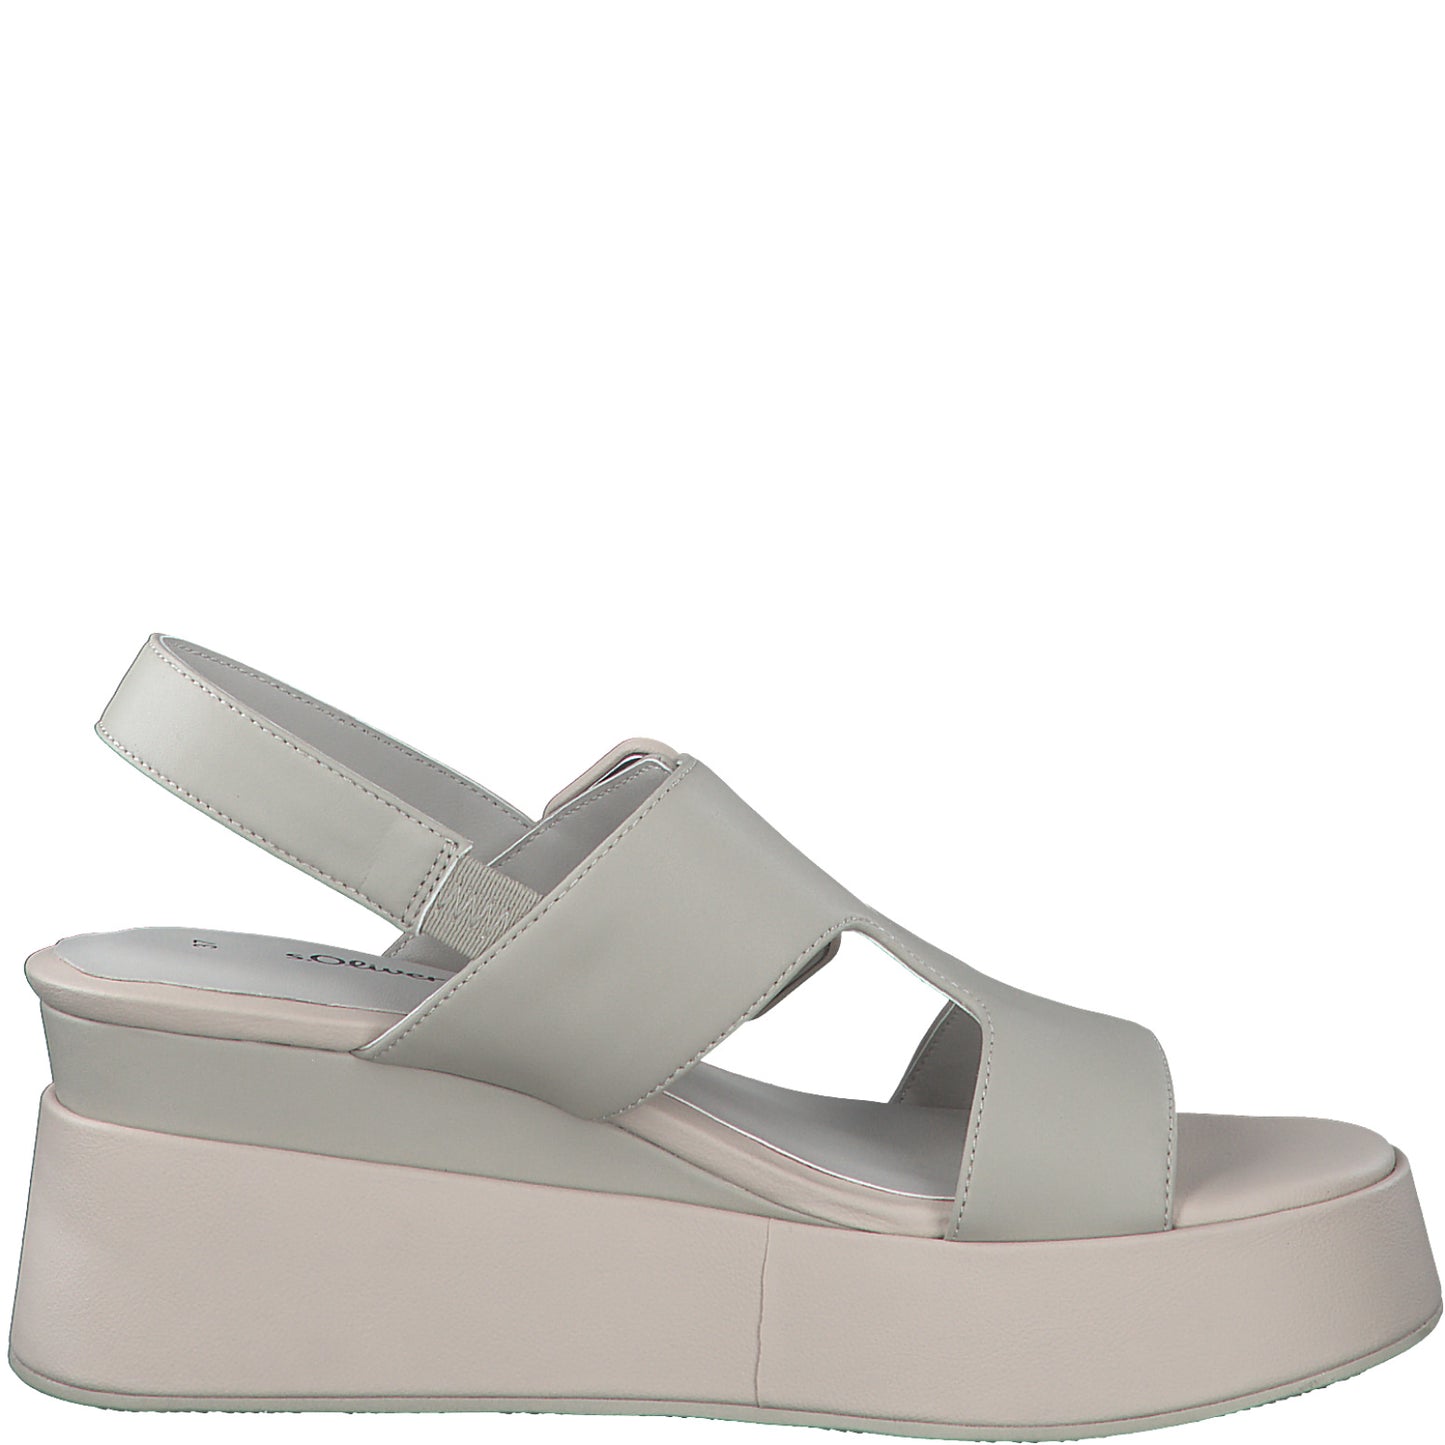 S.oliver Sandals  Taupe